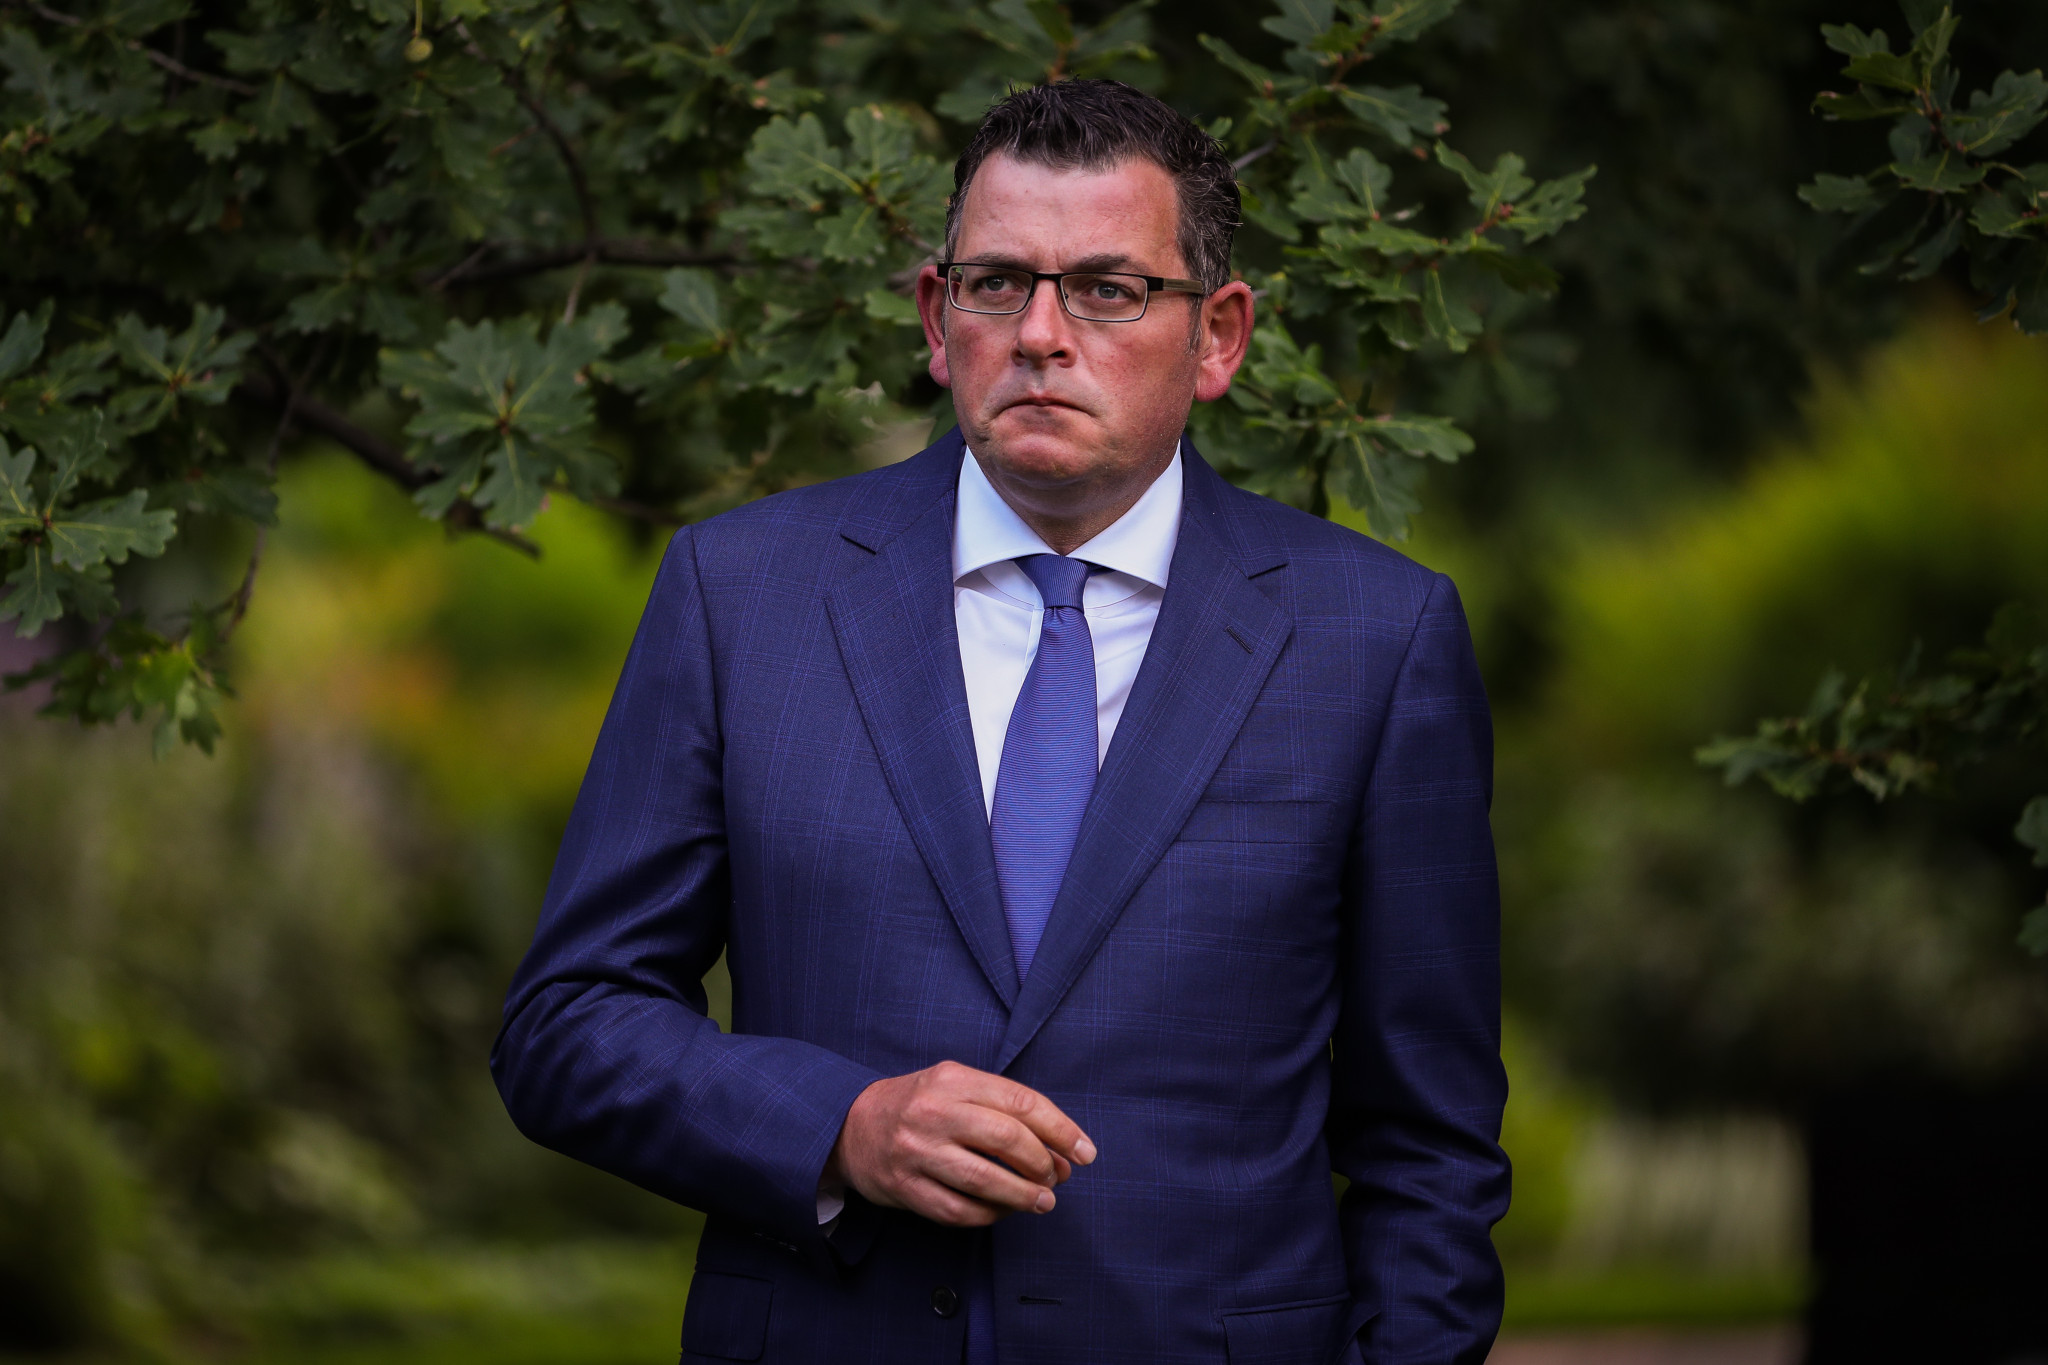 Andrews resigns as Victoria State Premier after pulling out of 2026 Commonwealth Games